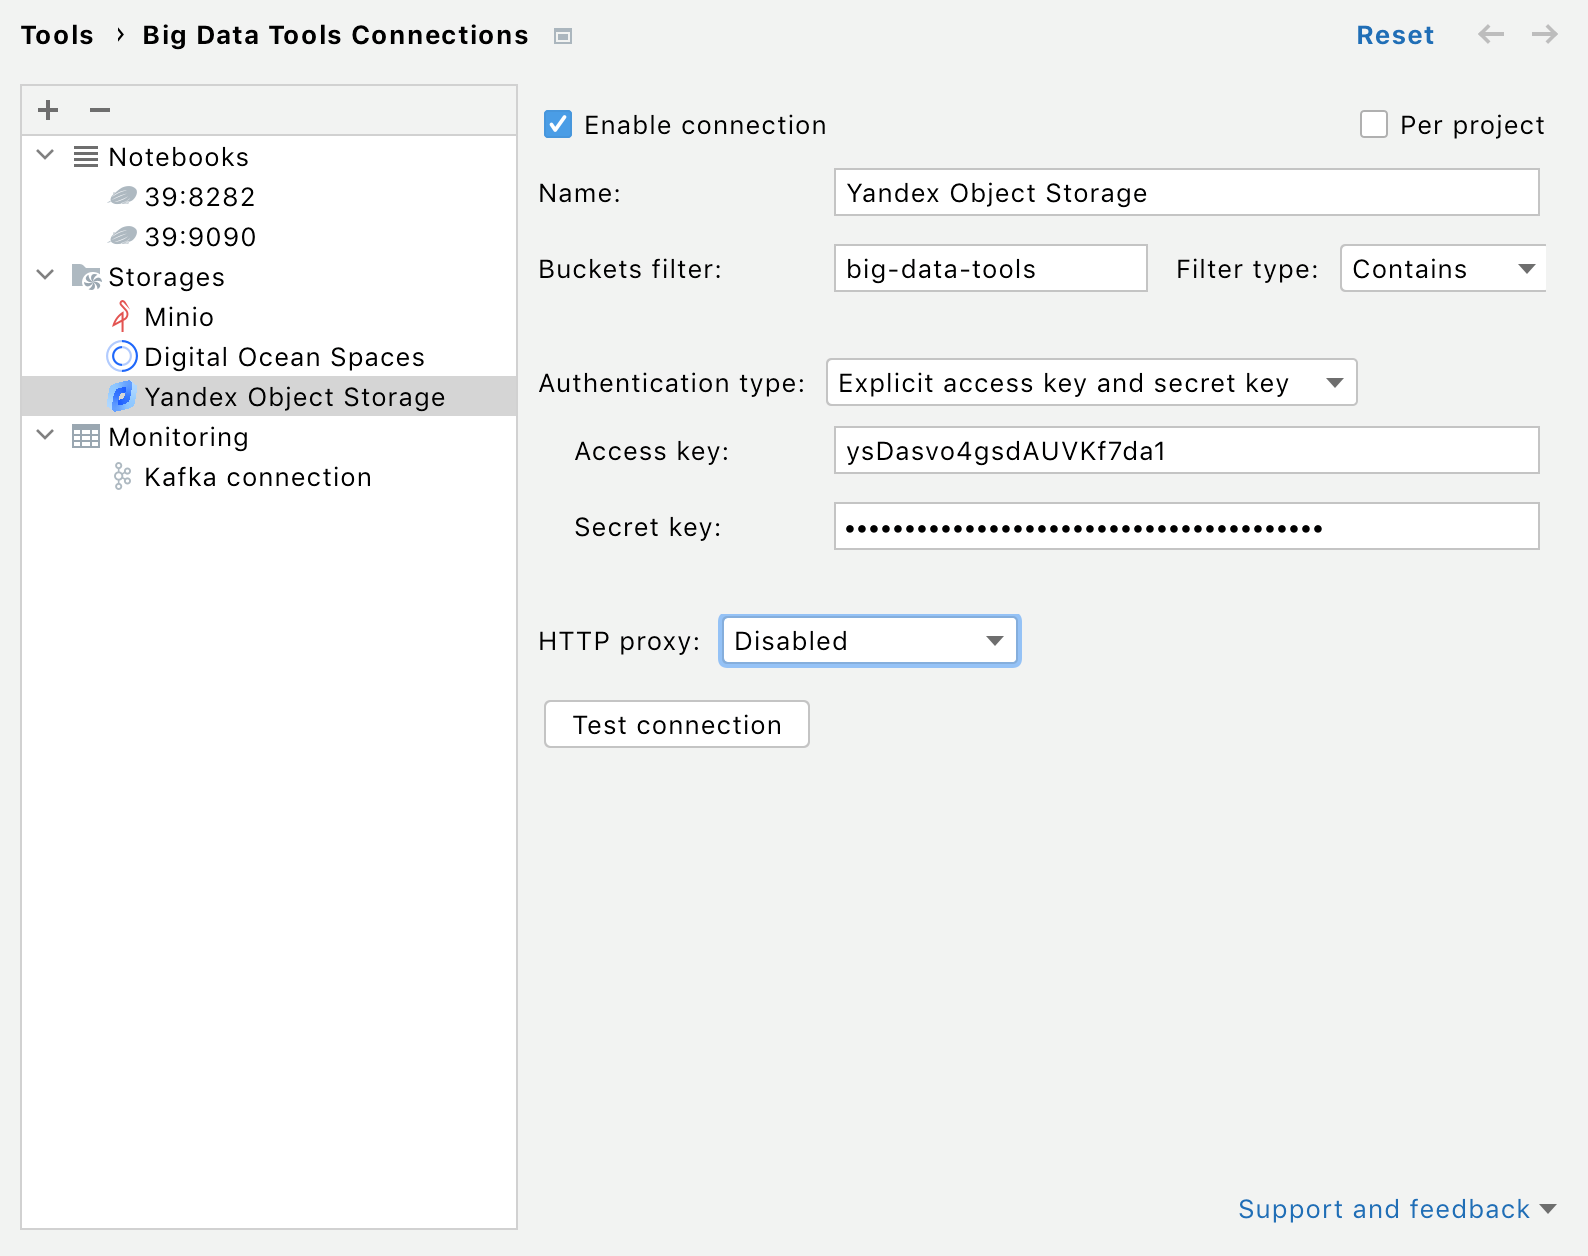 Connection settings for Yandex Object Storage